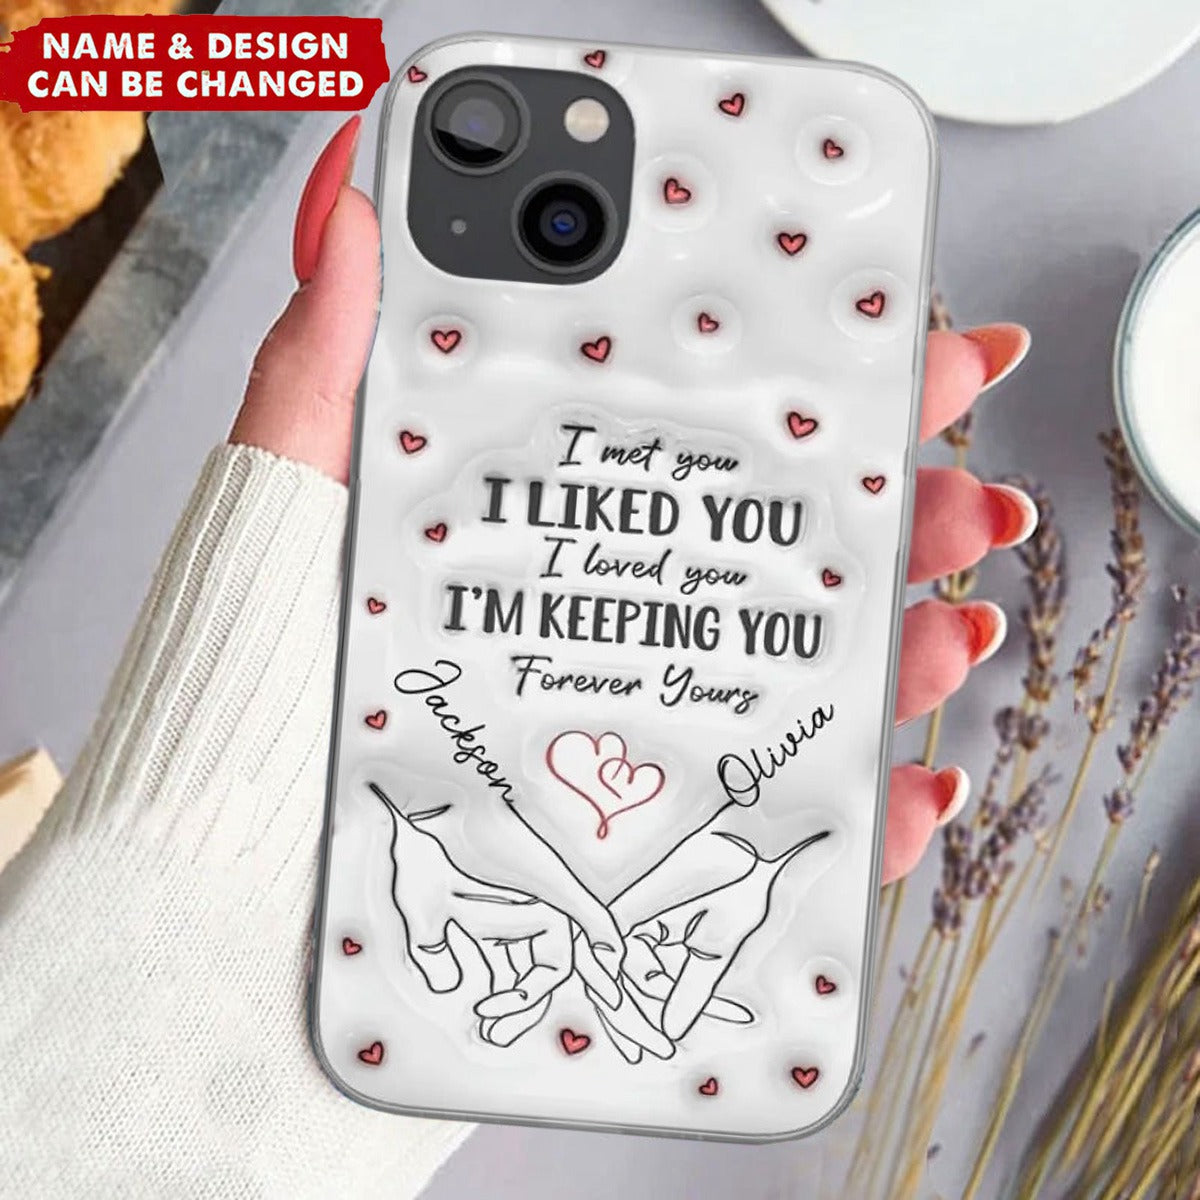 From Our First Kiss Till Our Last Breath - Couple Personalized Phone Case